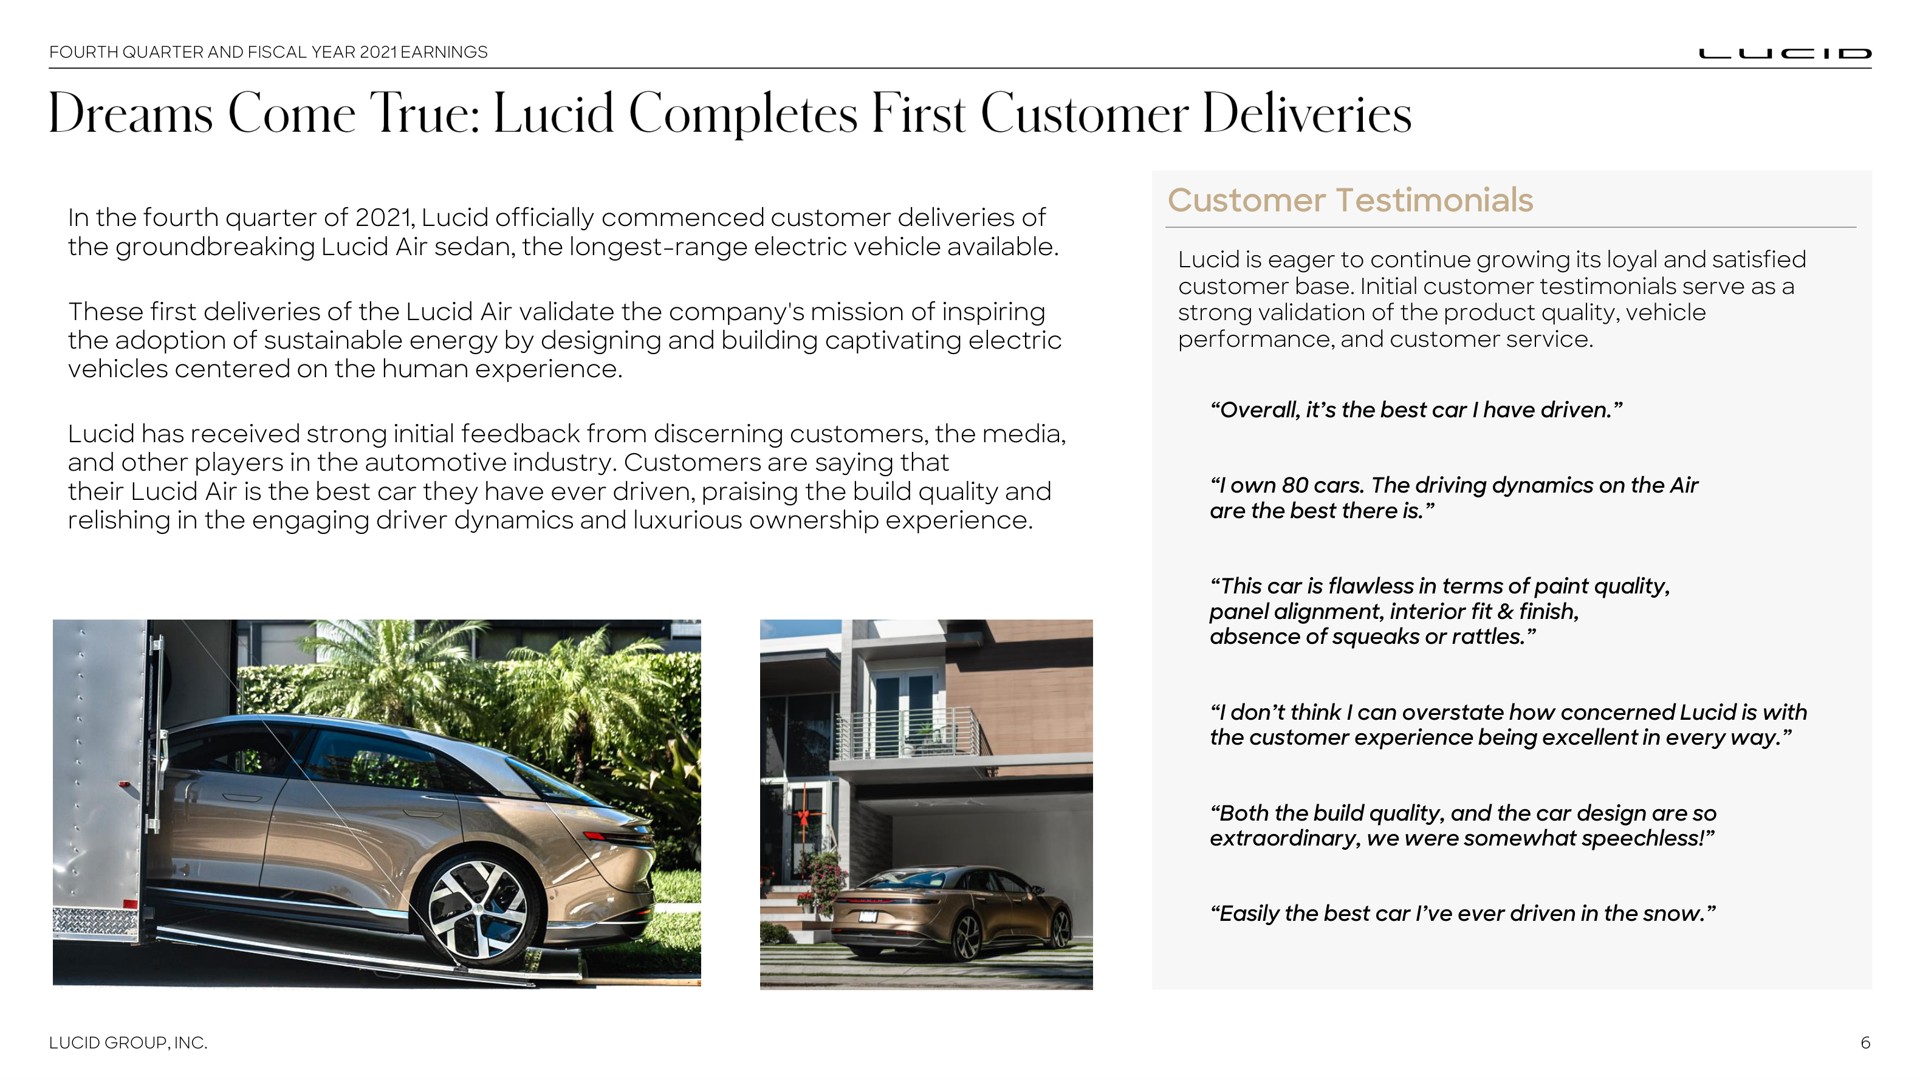 in the fourth quarter of lucid officially commenced customer deliveries of the lucid air sedan the range electric vehicle available these first deliveries of the lucid air validate the company mission of inspiring the adoption of sustainable energy by designing and building captivating electric vehicles centered on the human experience lucid has received strong initial feedback from discerning customers the media and other players in the automotive industry customers are saying that their lucid air is the best car they have ever driven praising the build quality and relishing in the engaging driver dynamics and luxurious ownership experience customer testimonials lucid is eager to continue growing its loyal and satisfied customer base initial customer testimonials serve as a strong validation of the product quality vehicle performance and customer service overall it the best car i have driven i own cars the driving dynamics on the air are the best there is this car is flawless in terms of paint quality panel alignment interior fit finish absence of squeaks or rattles i don think i can overstate how concerned lucid is with the customer experience being excellent in every way both the build quality and the car design are so extraordinary we were somewhat speechless easily the best car i ever driven in the snow dreams come true completes | Lucid Motors